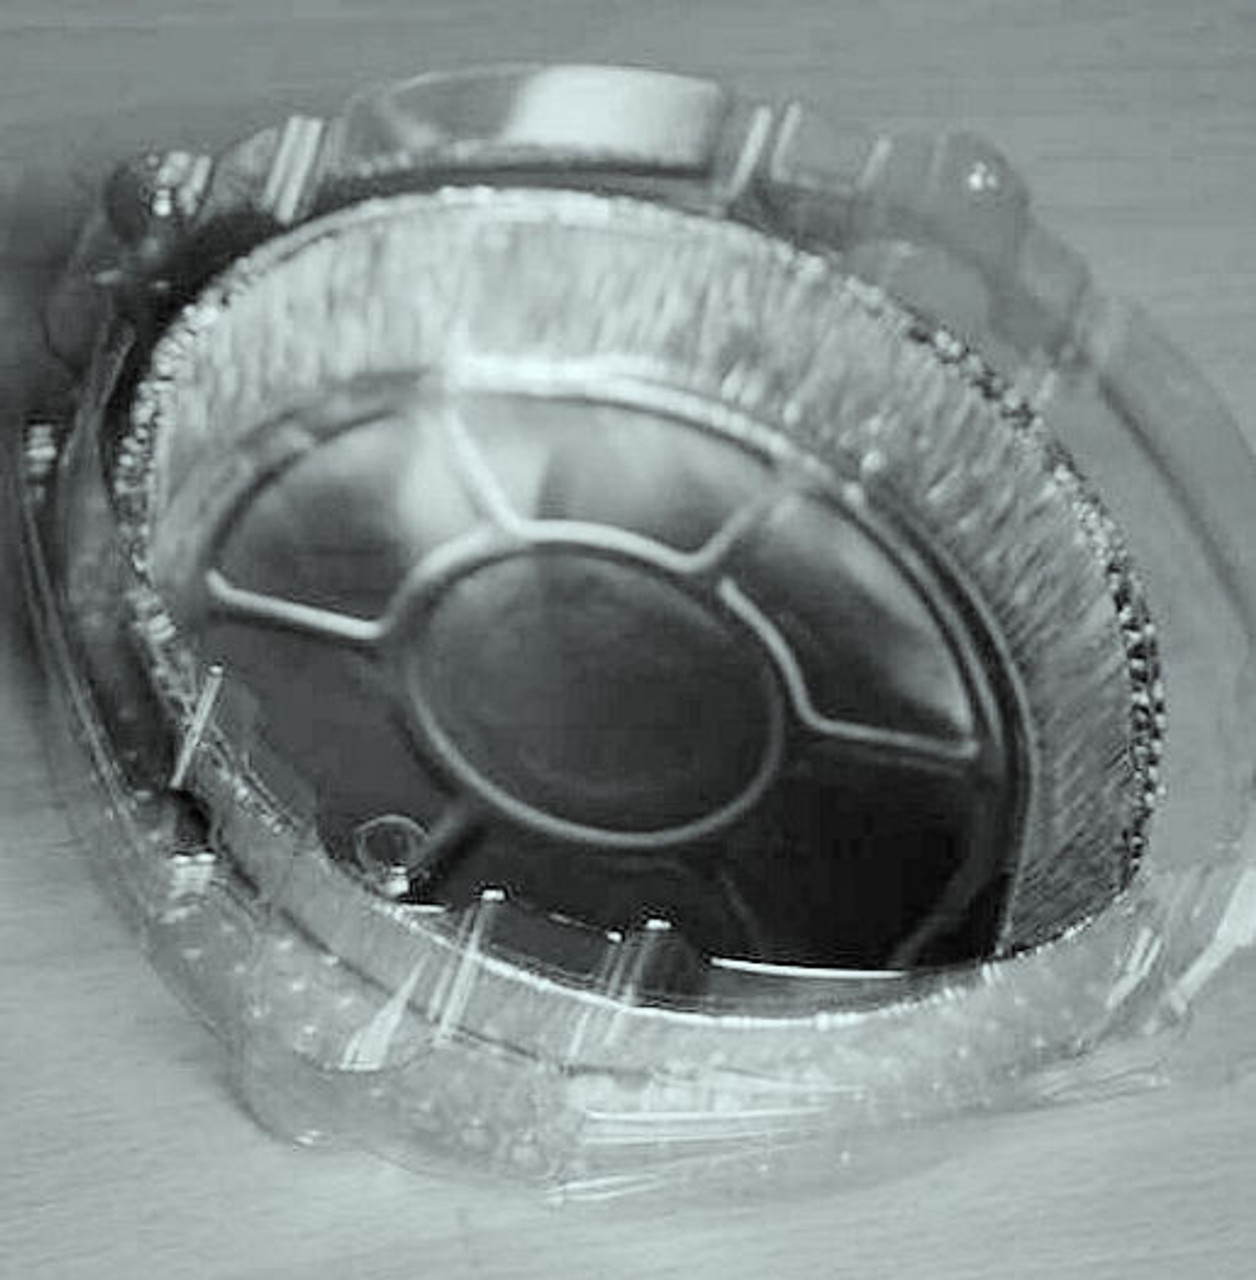  Flan Container